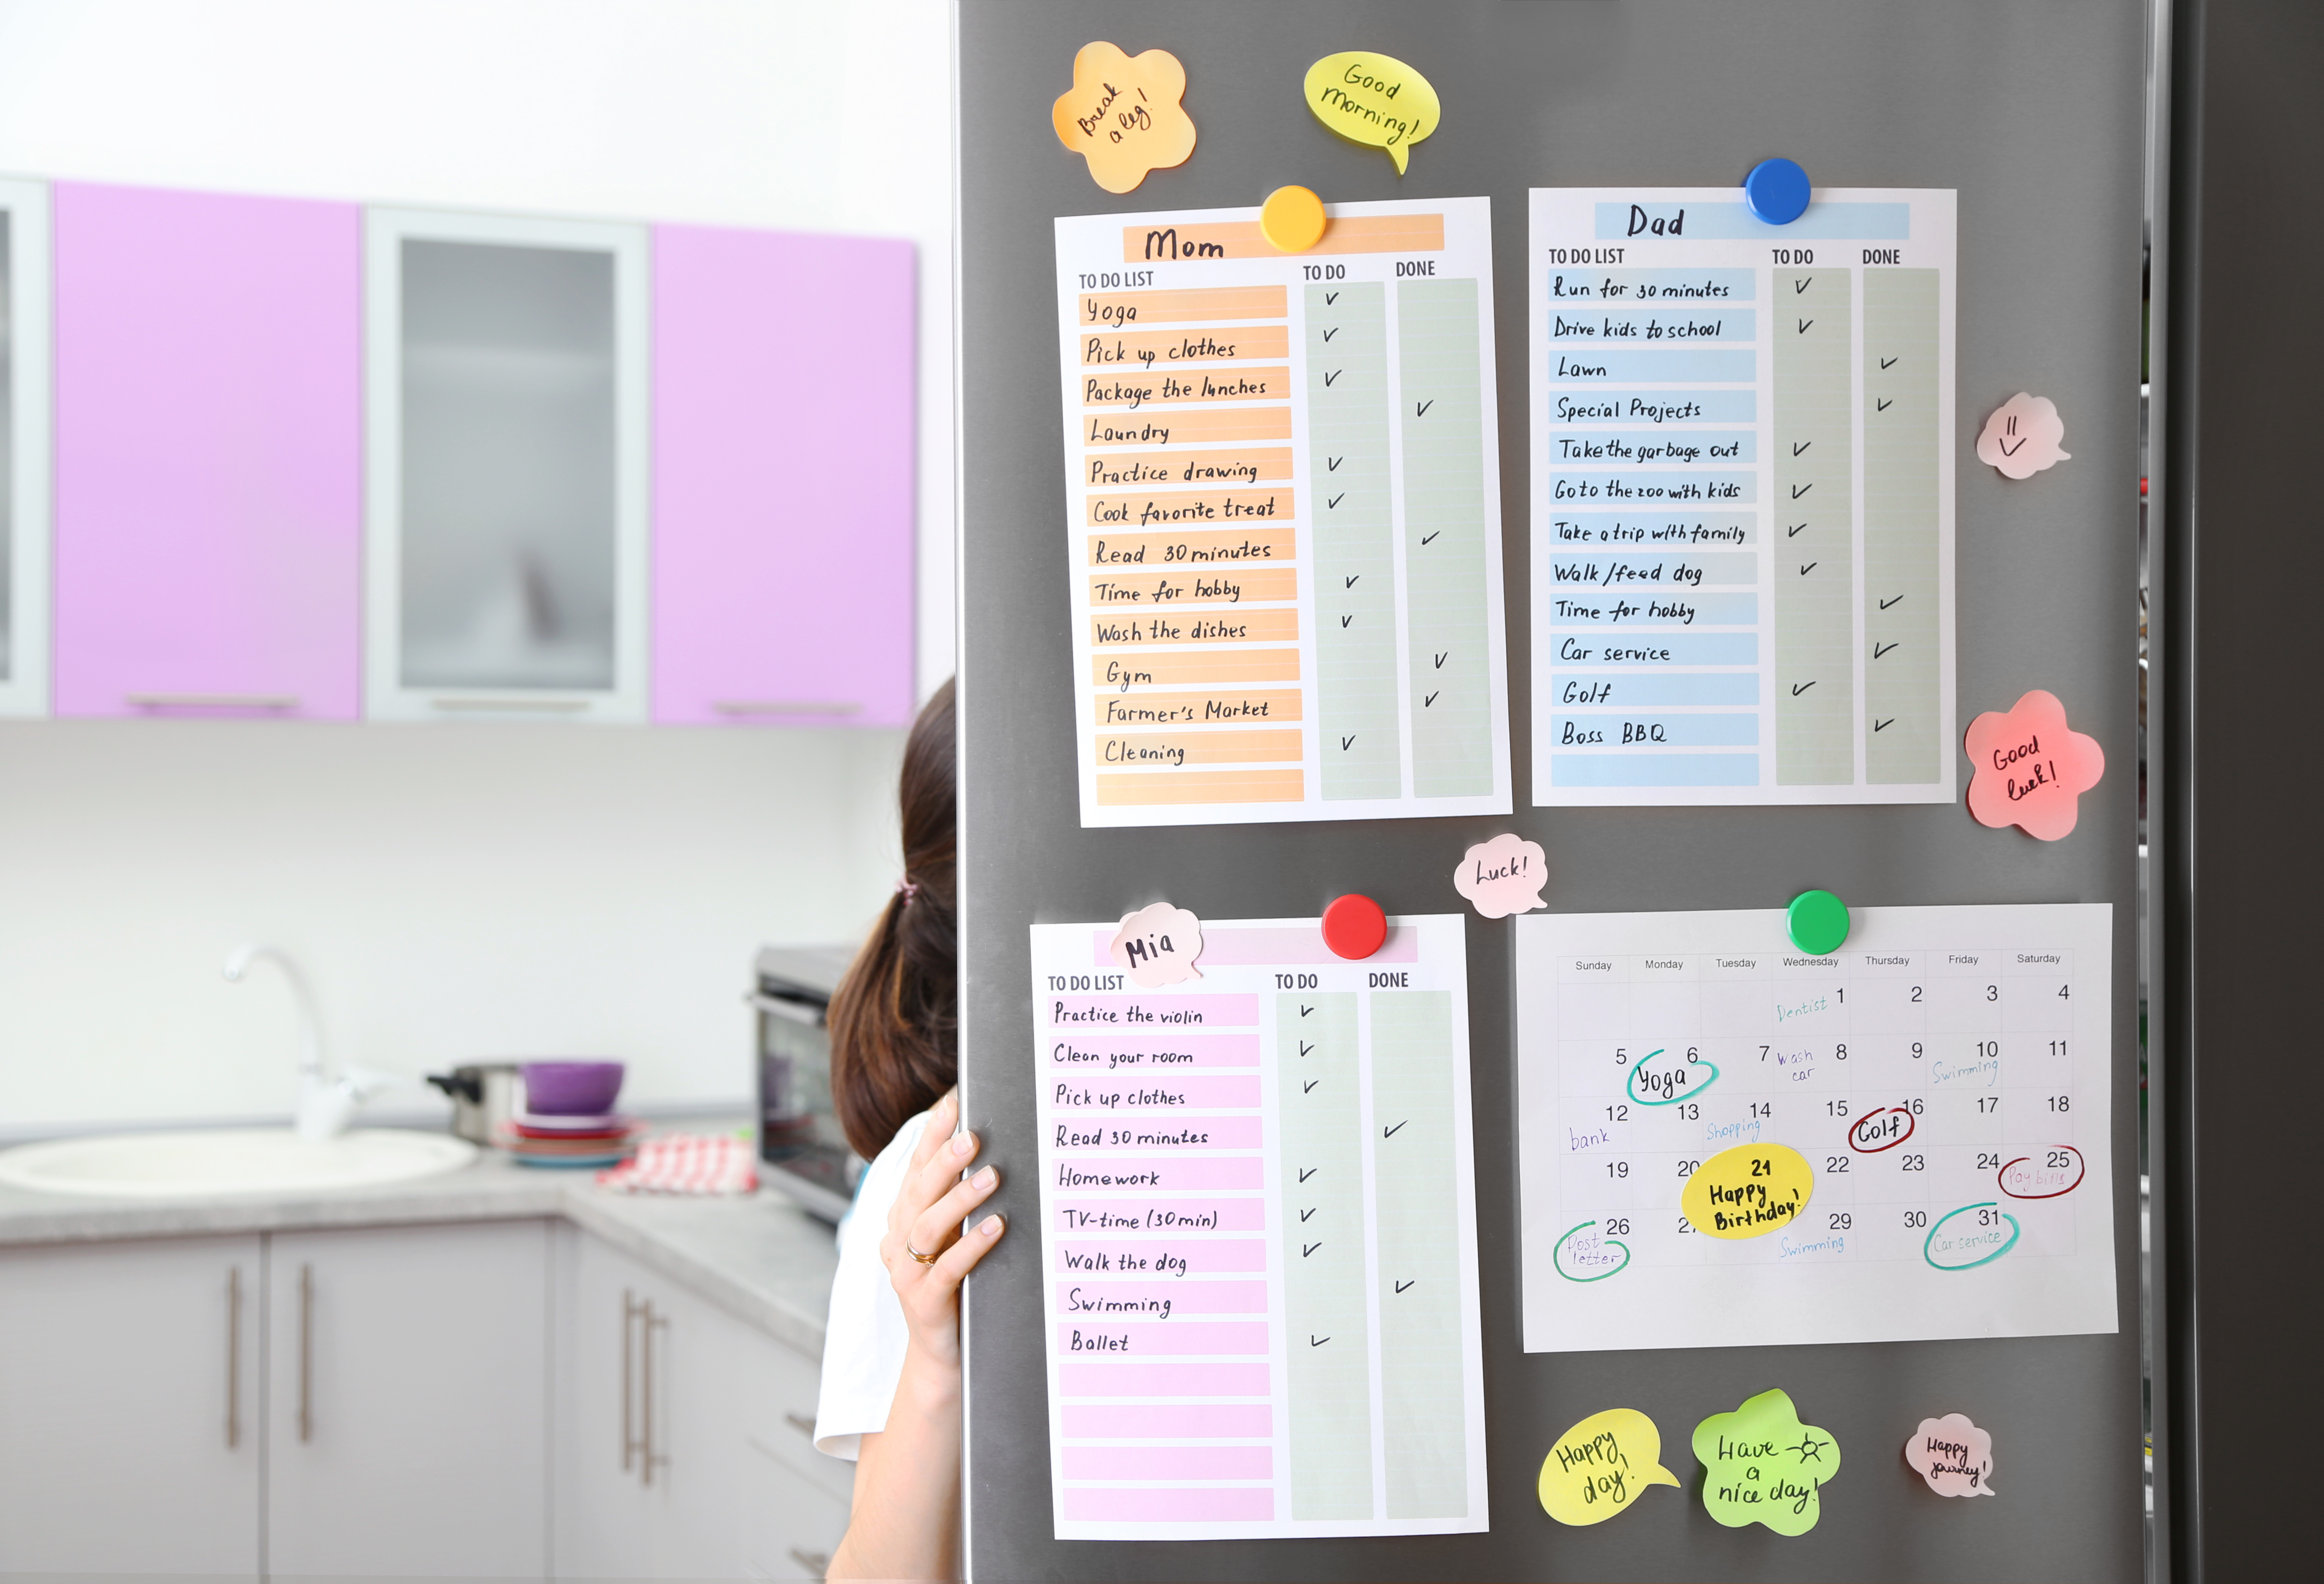 Girl opening a refrigerator displaying to-do lists for each family member and other sticky notes.